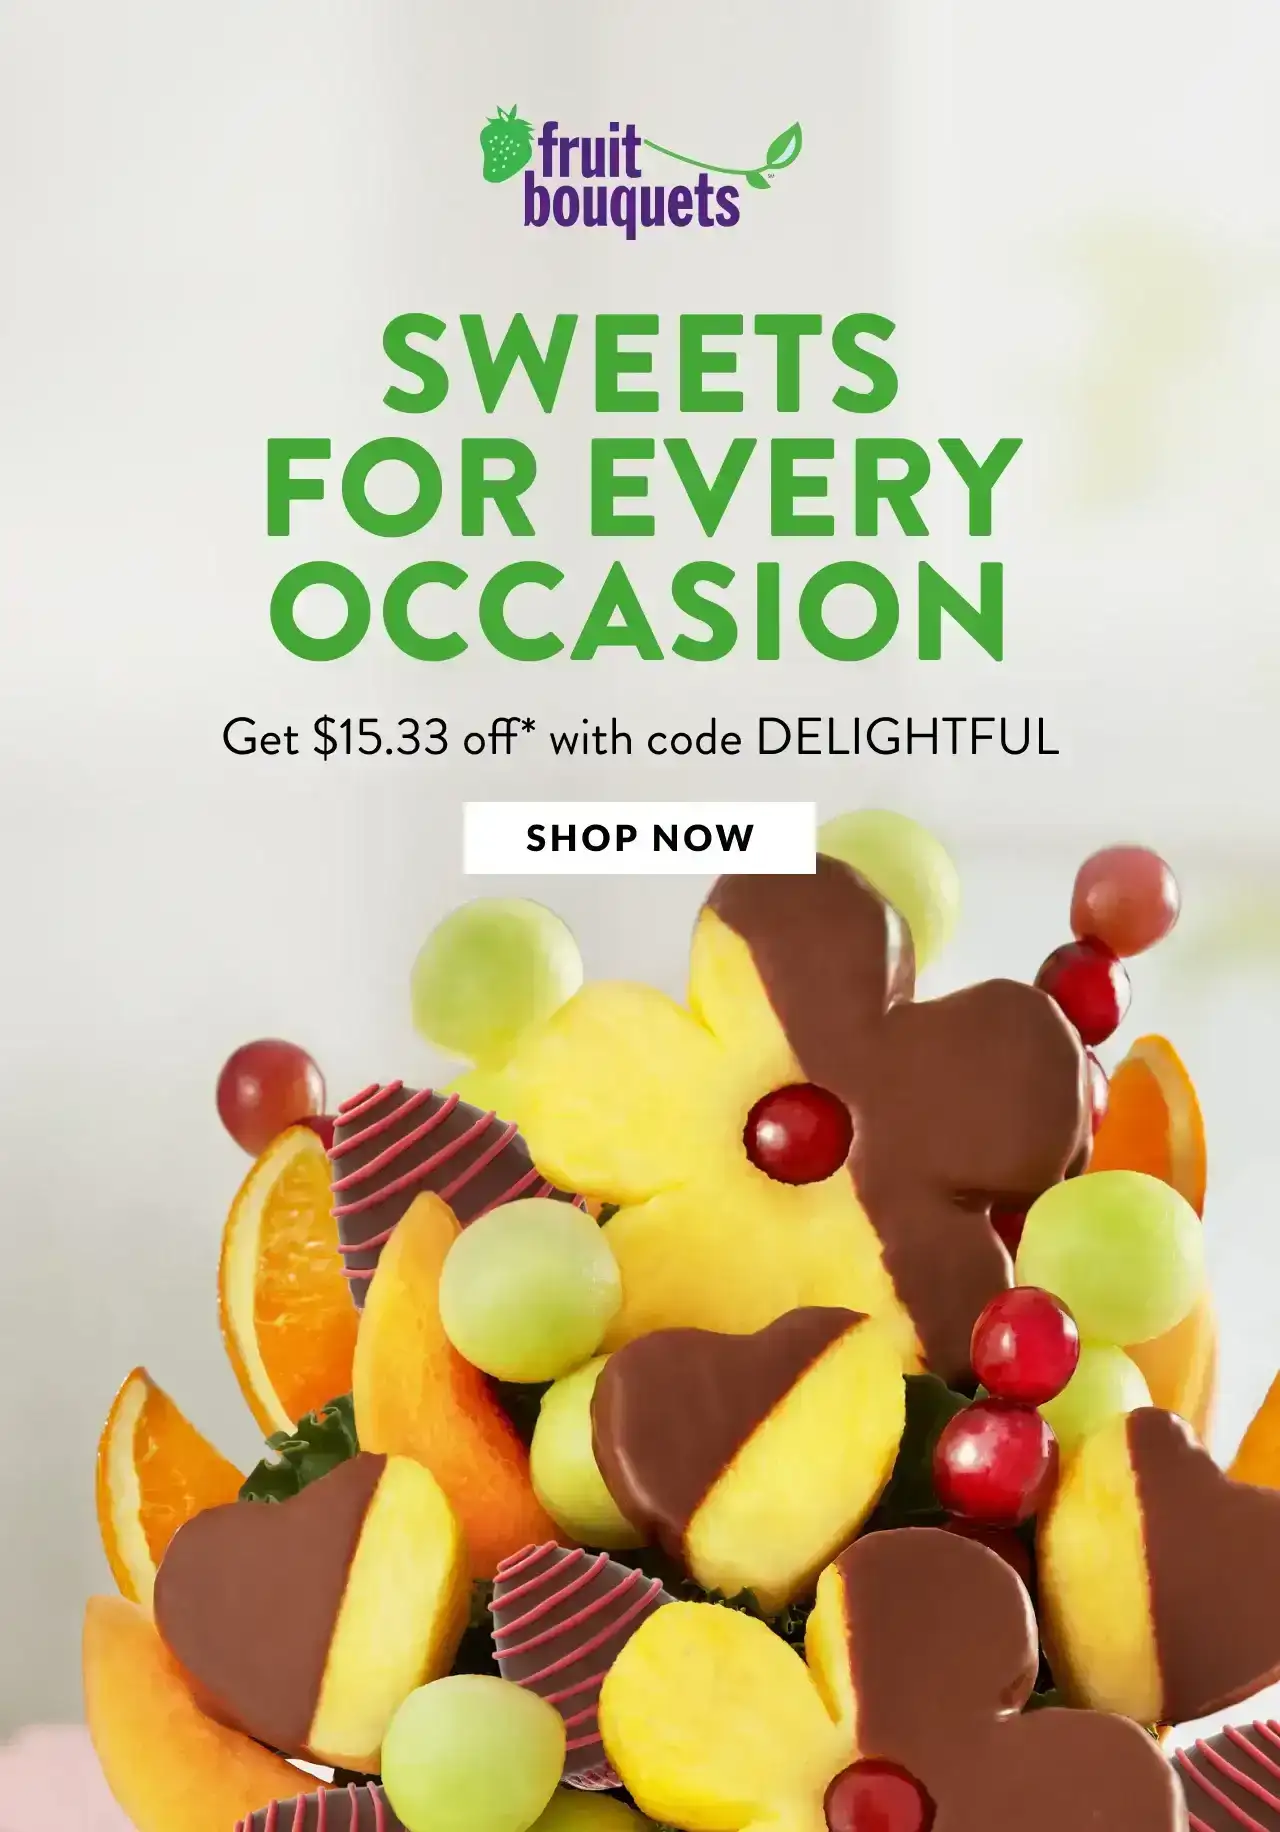 GET \\$15.33 off with code DELIGHTFUL